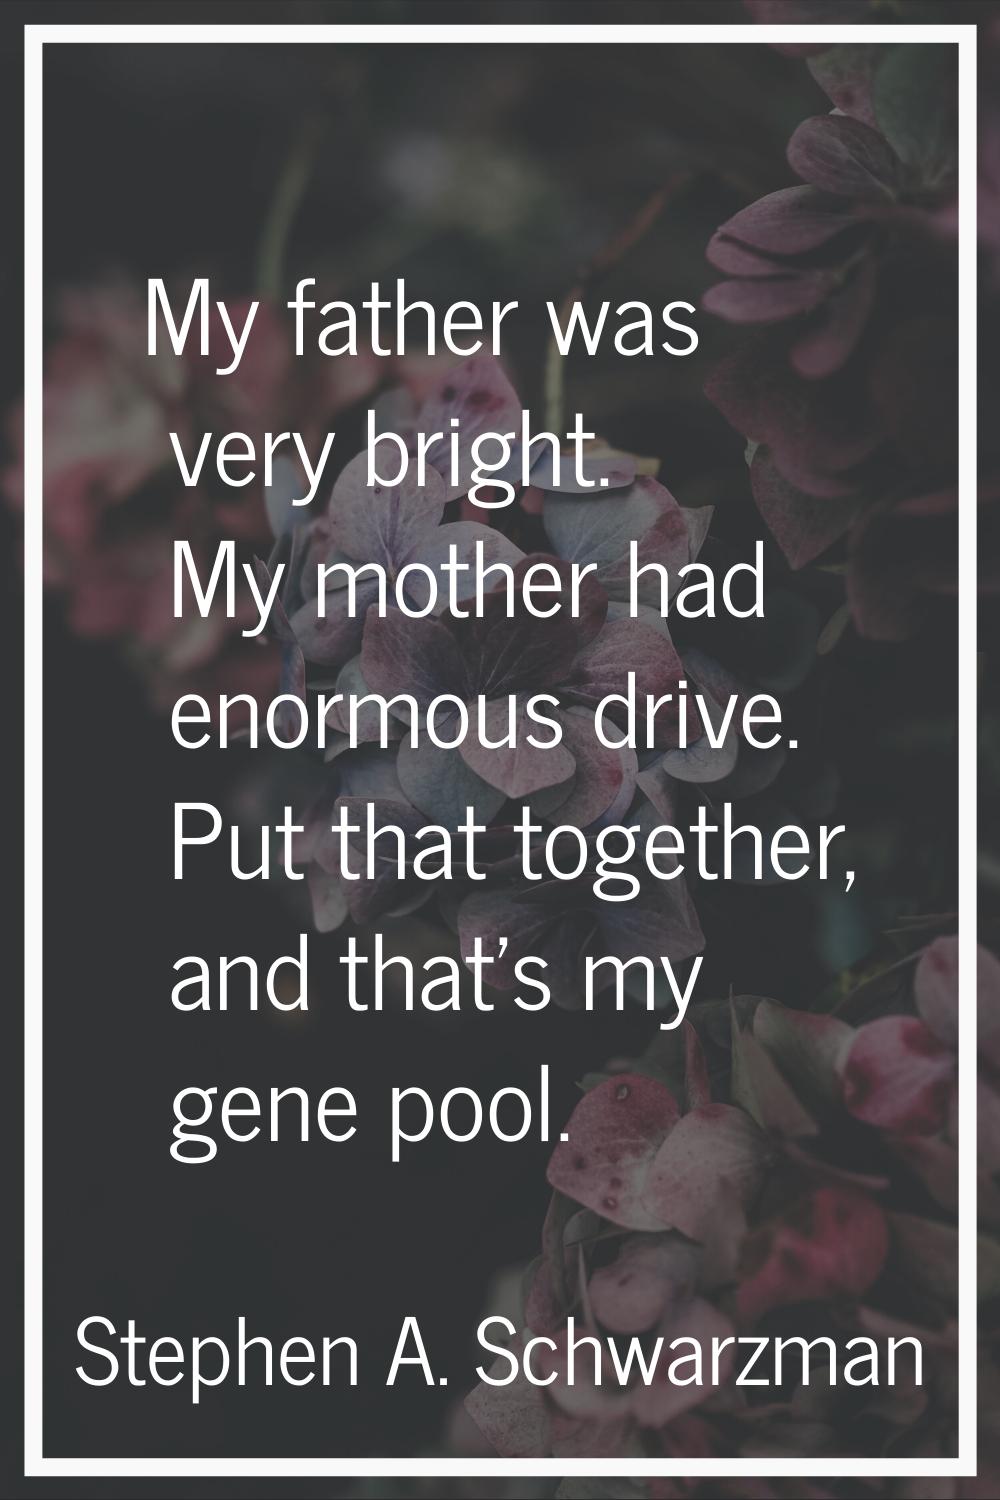 My father was very bright. My mother had enormous drive. Put that together, and that's my gene pool